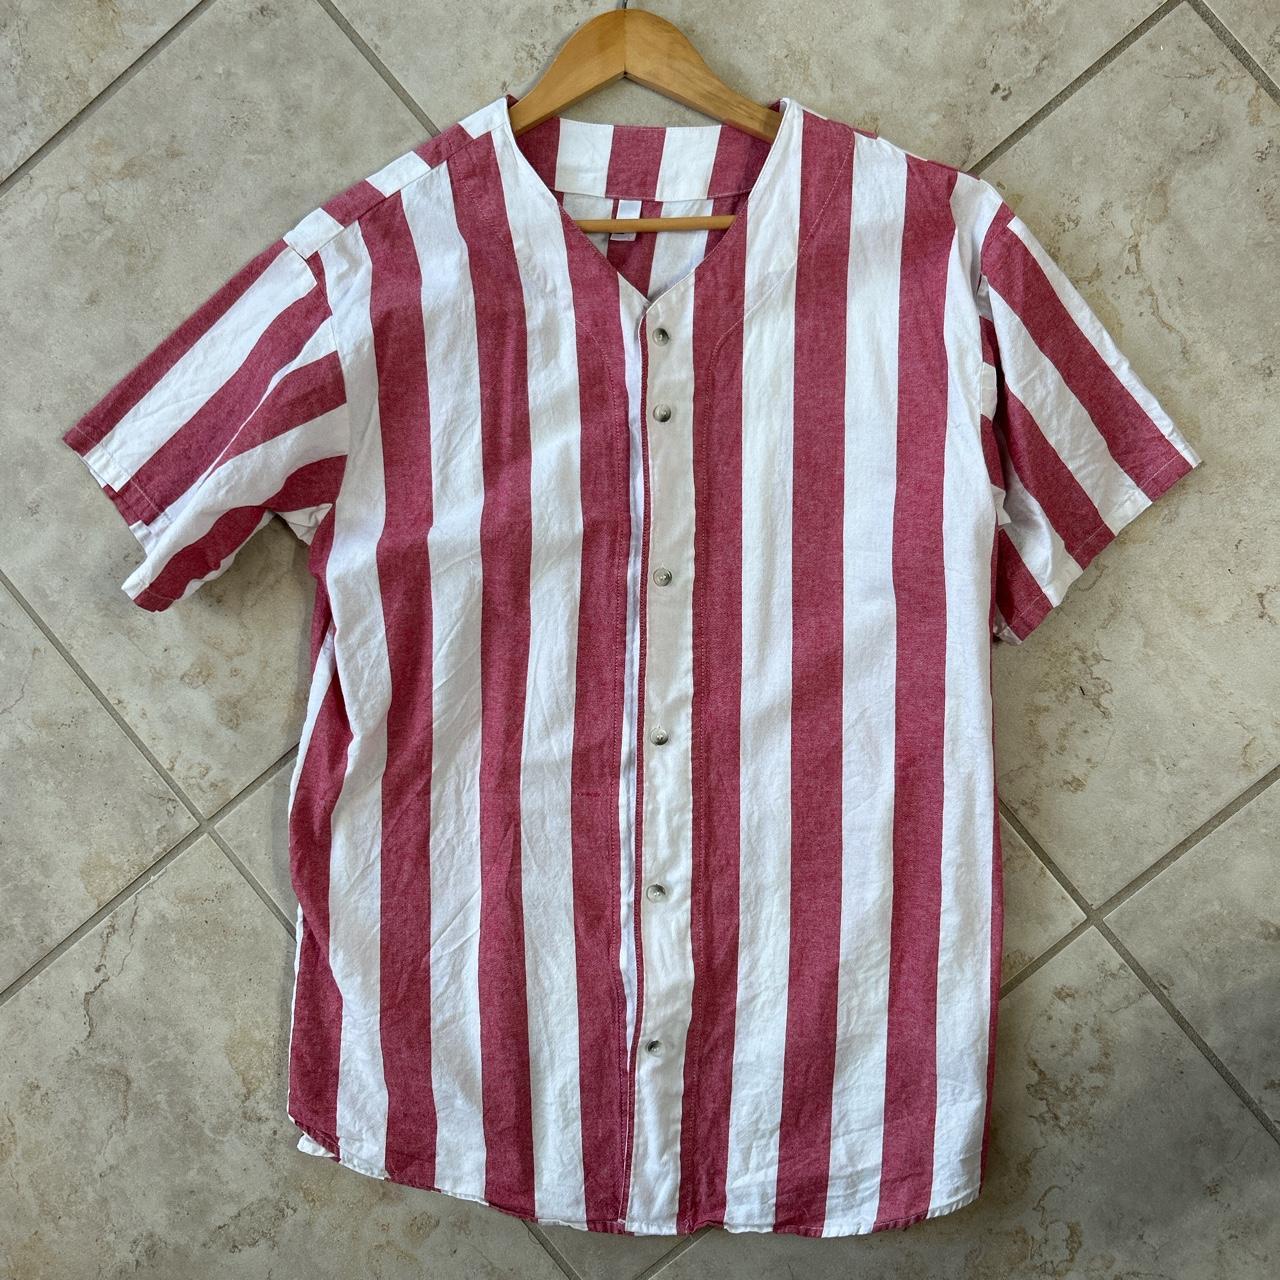 American Apparel Men's White and Red Top